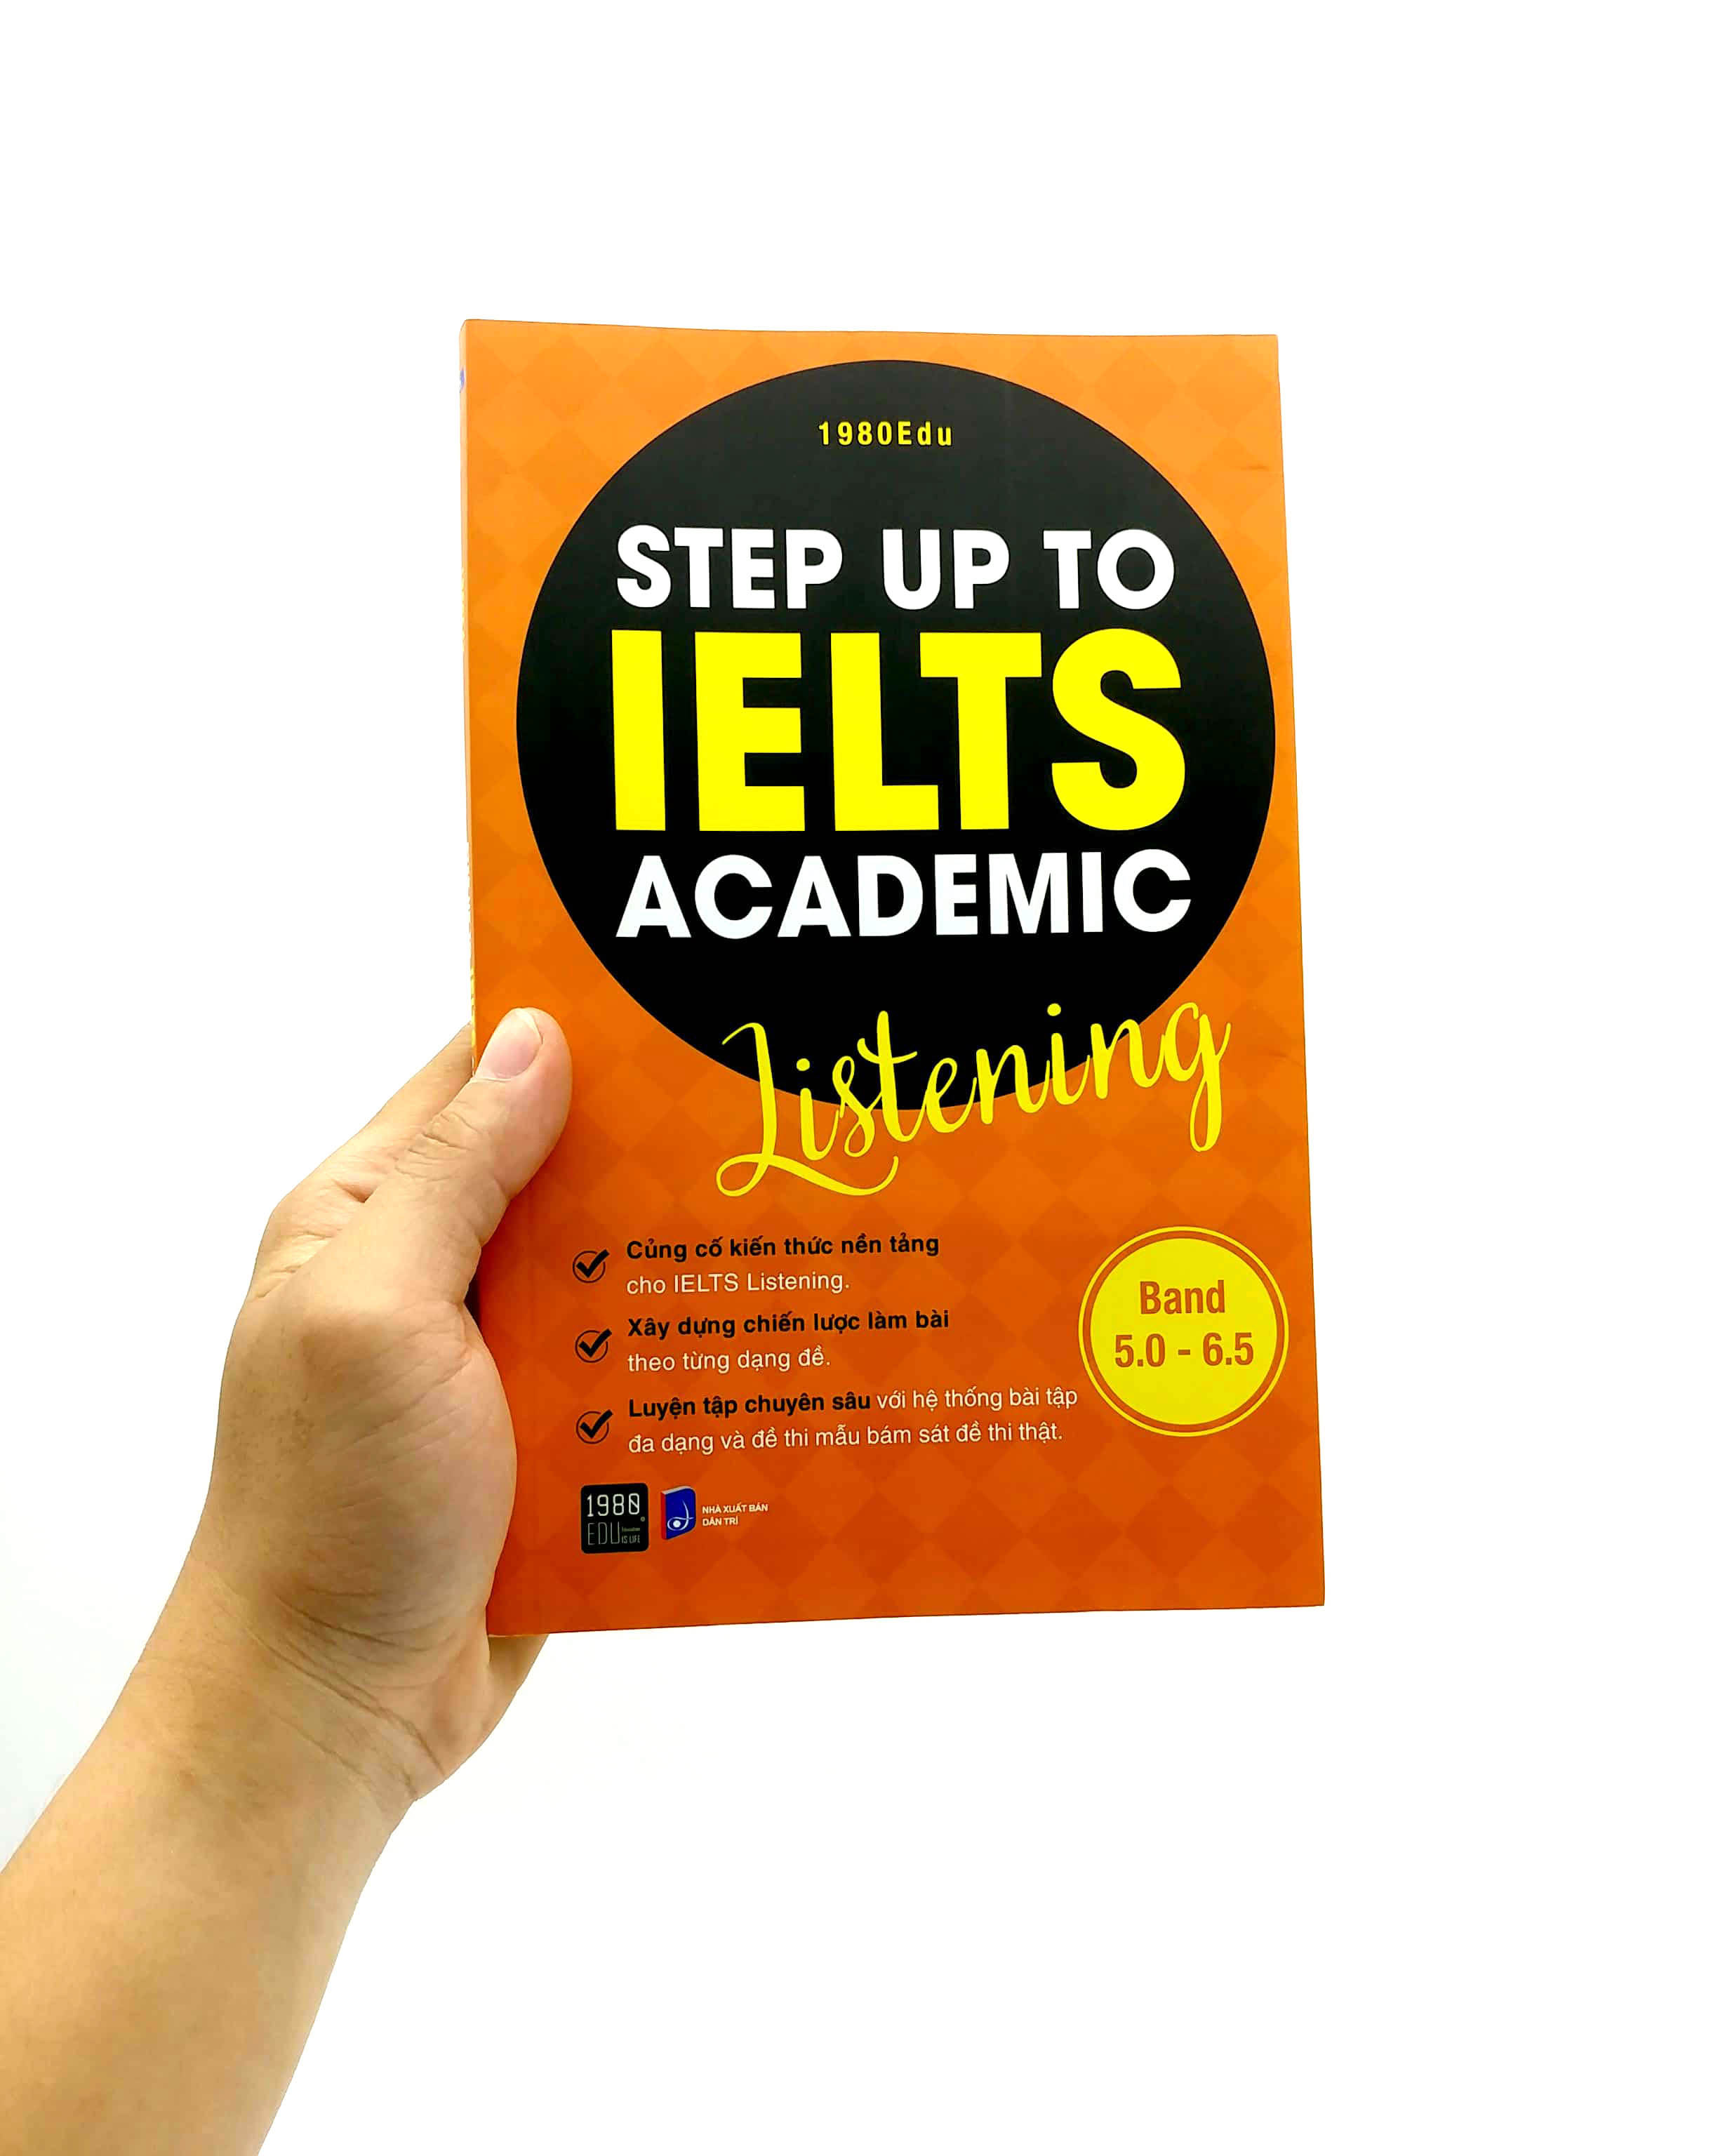 Step Up To Ielts Academic Listening PDF